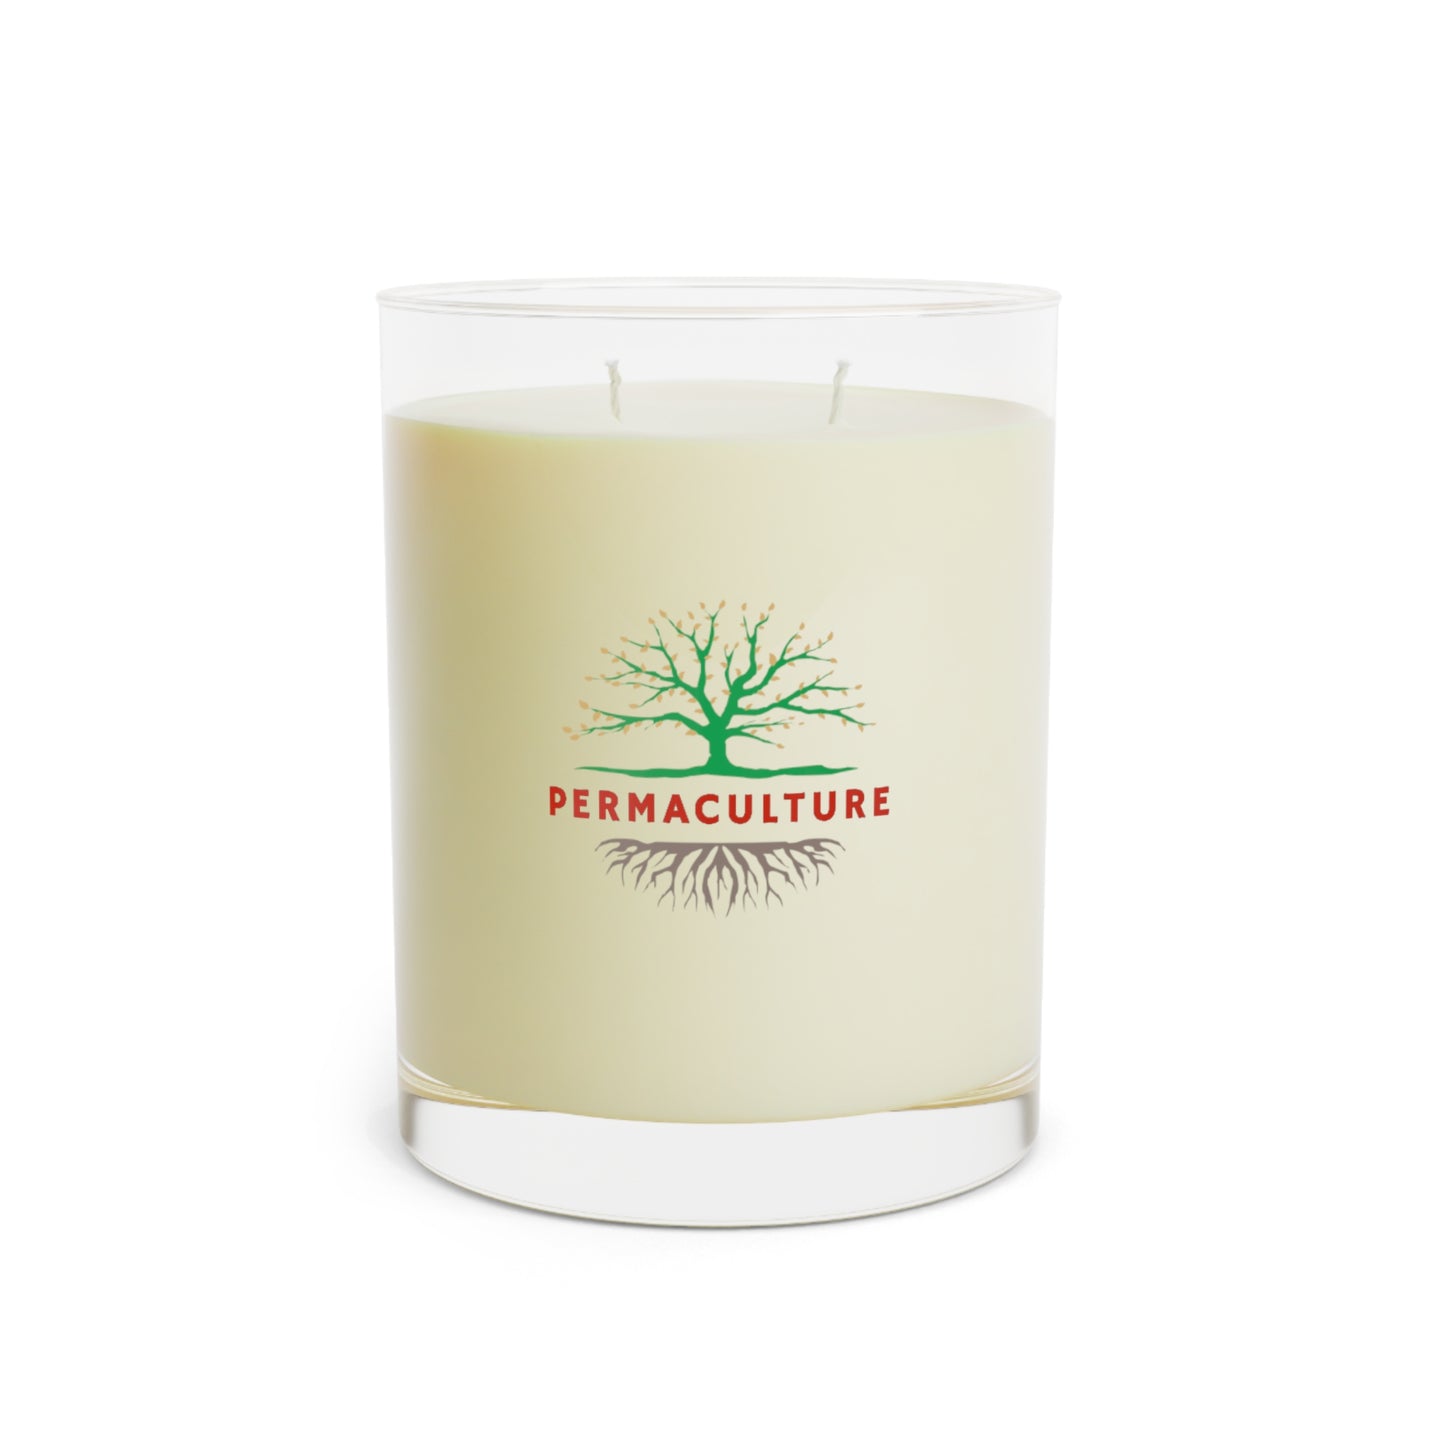 Permaculture, Scented Candle, Full Glass, 11oz